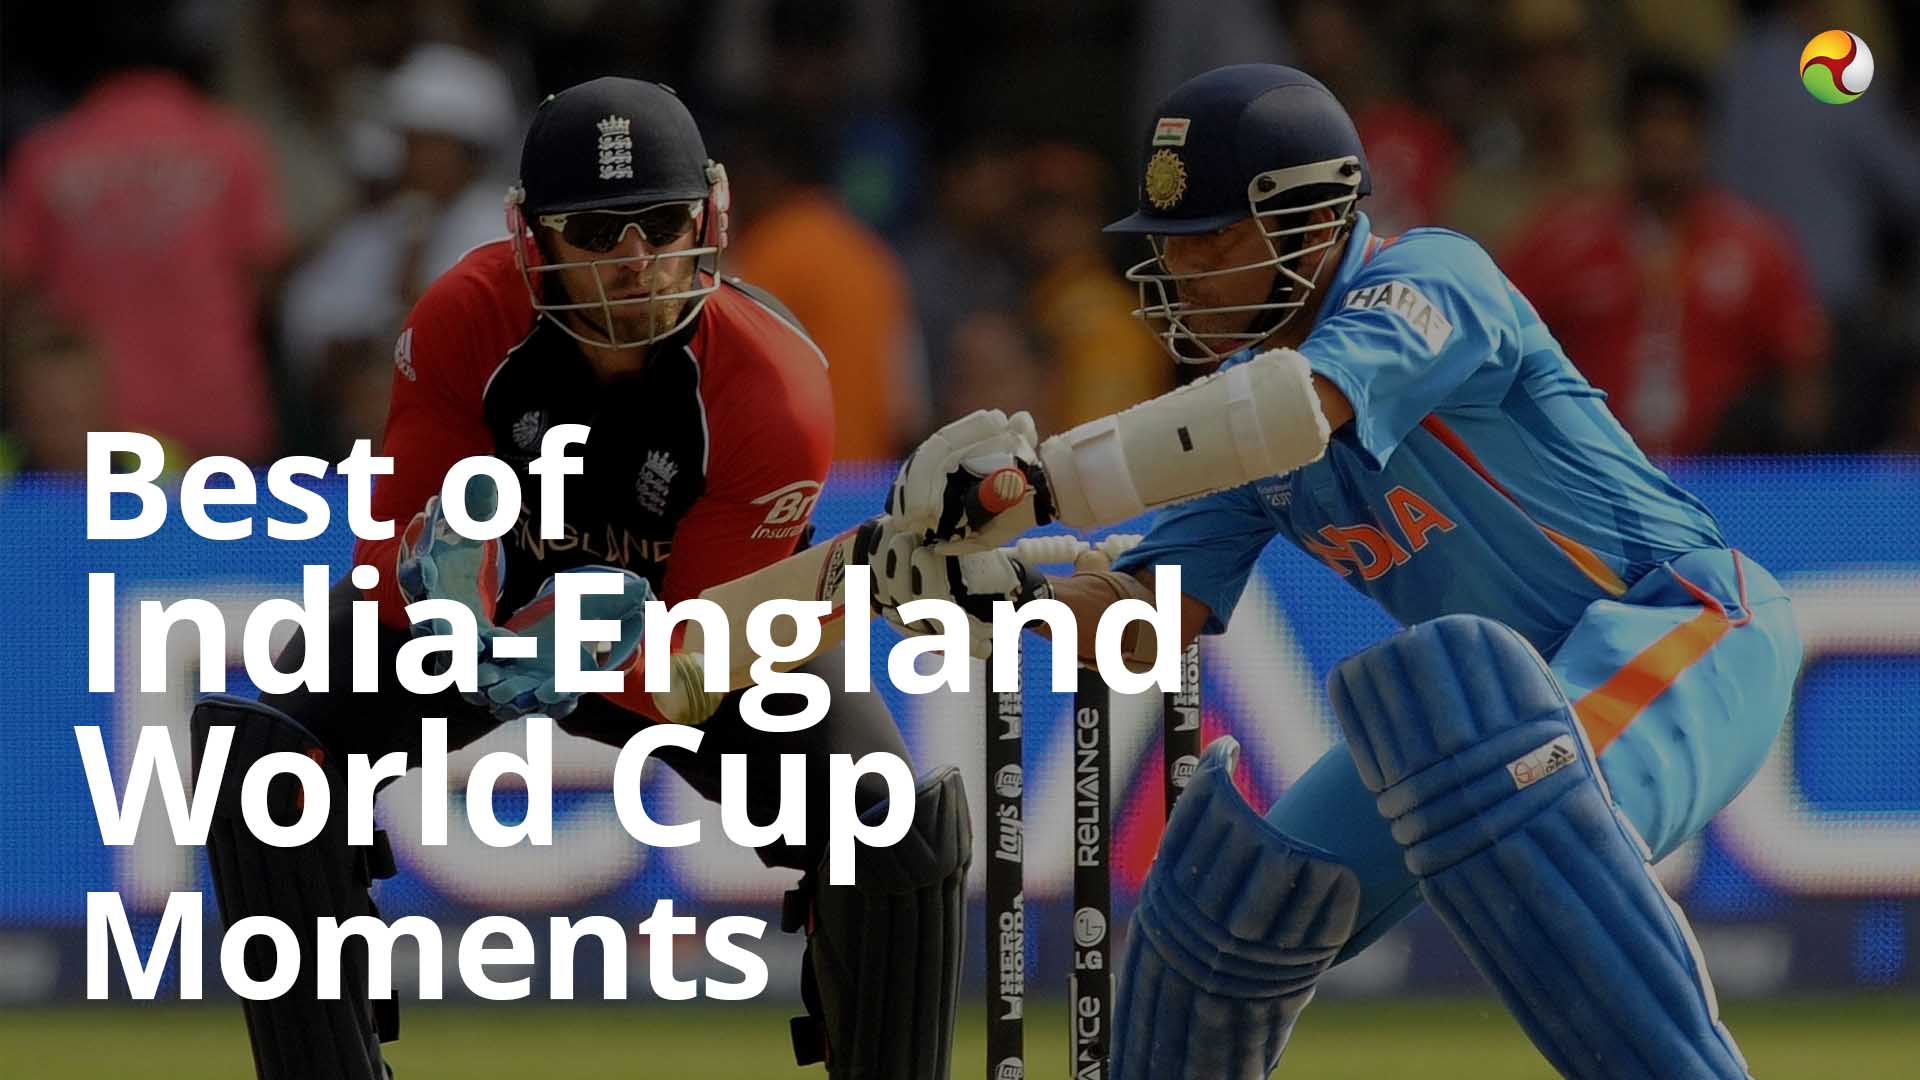 India vs England world cup, the federal, english news website